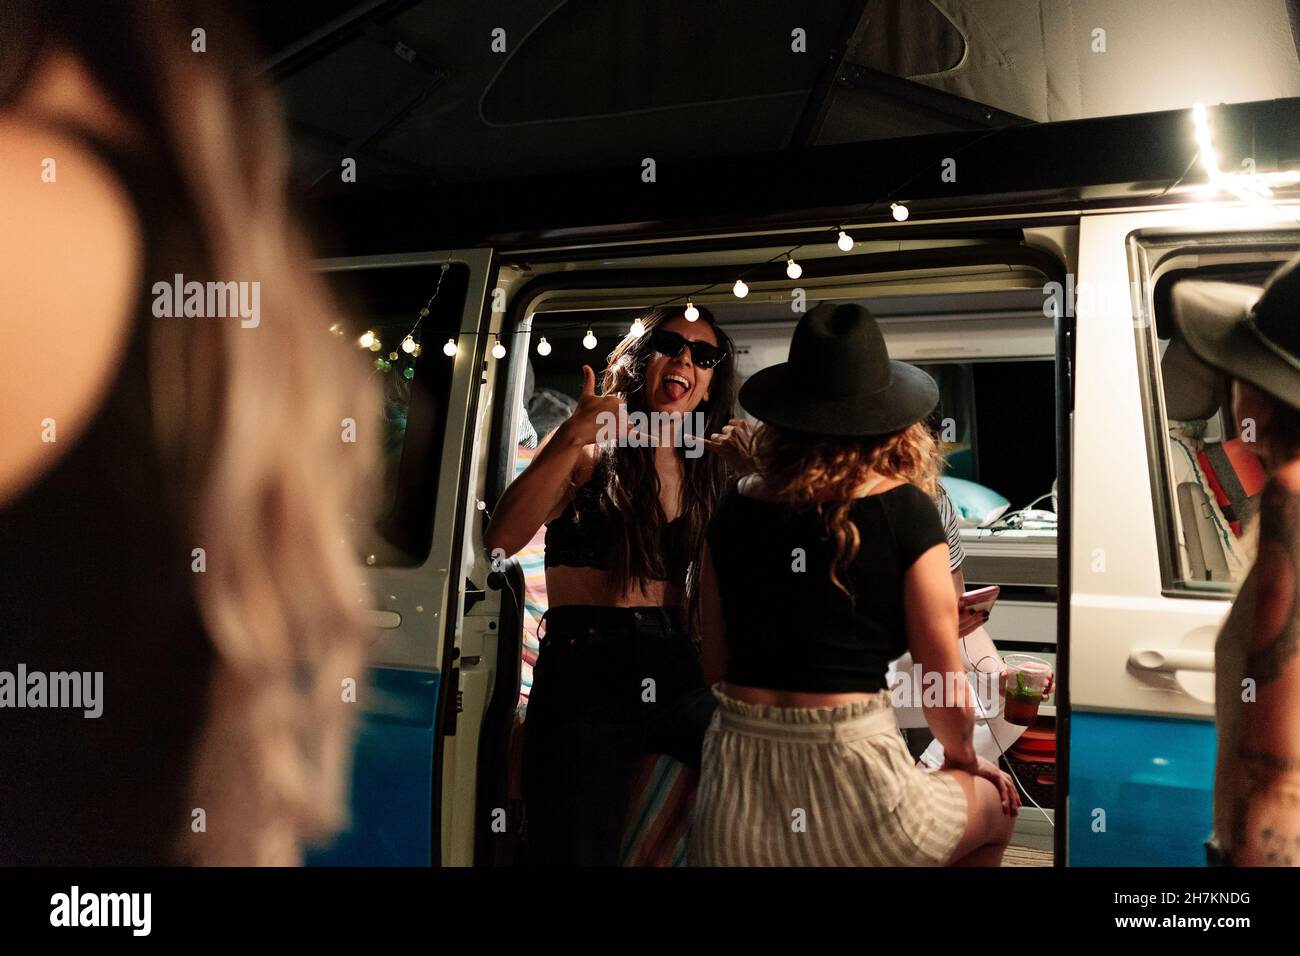 Woman showing shaka sign during party with female friends in camper van Stock Photo